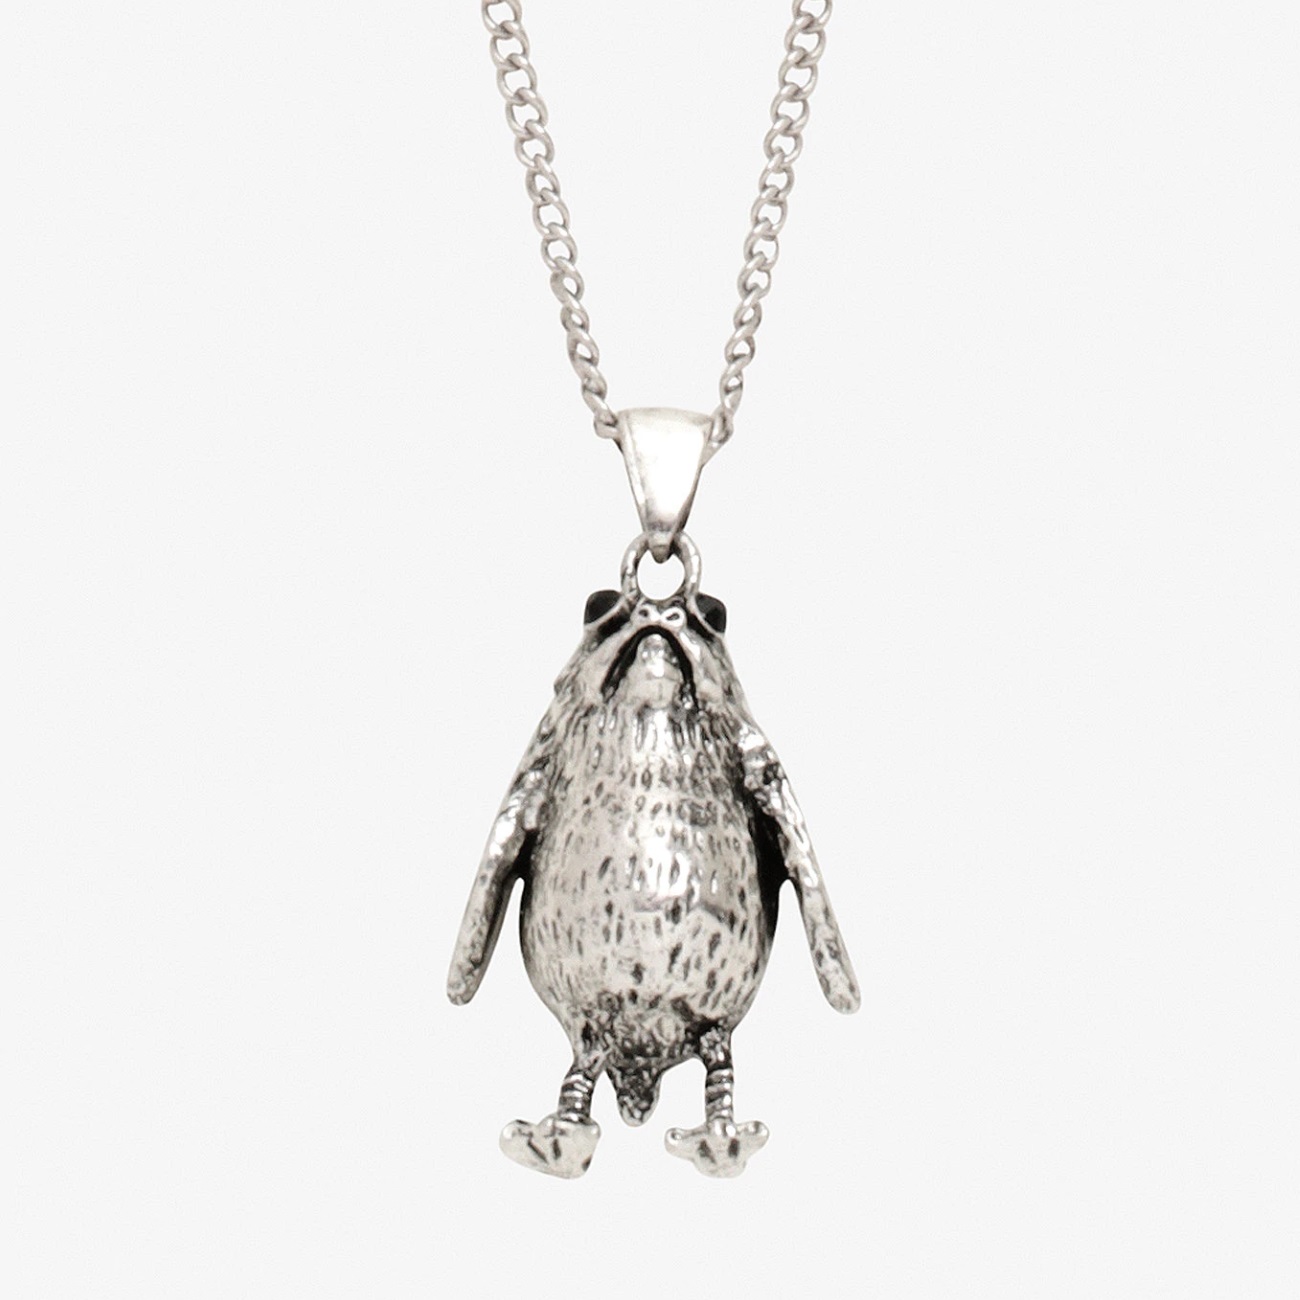 Star Wars Porg Necklace at Hot Topic